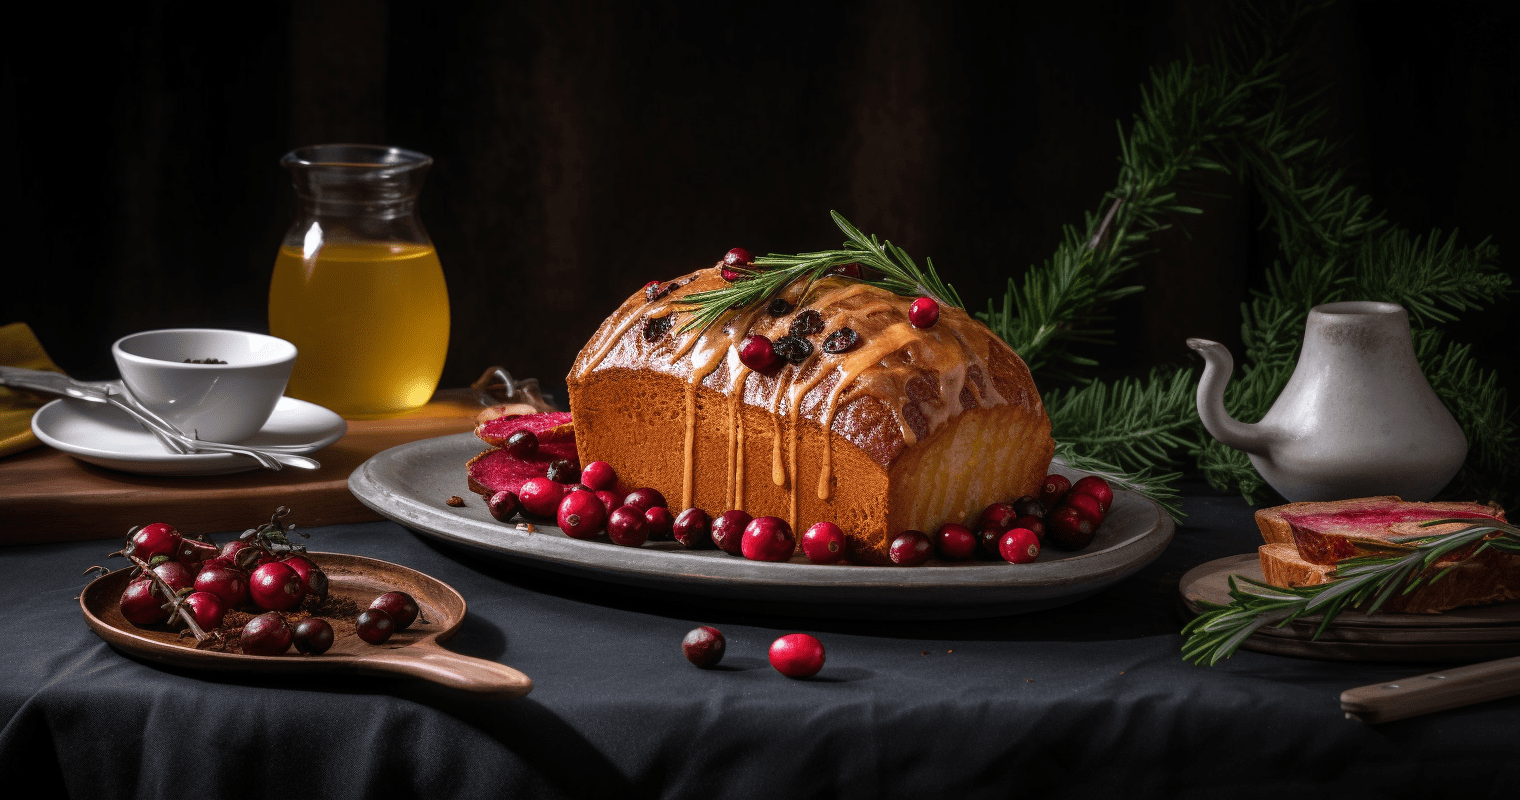 Cranberry Bread with Apple Cider Glaze Cooking Instructions